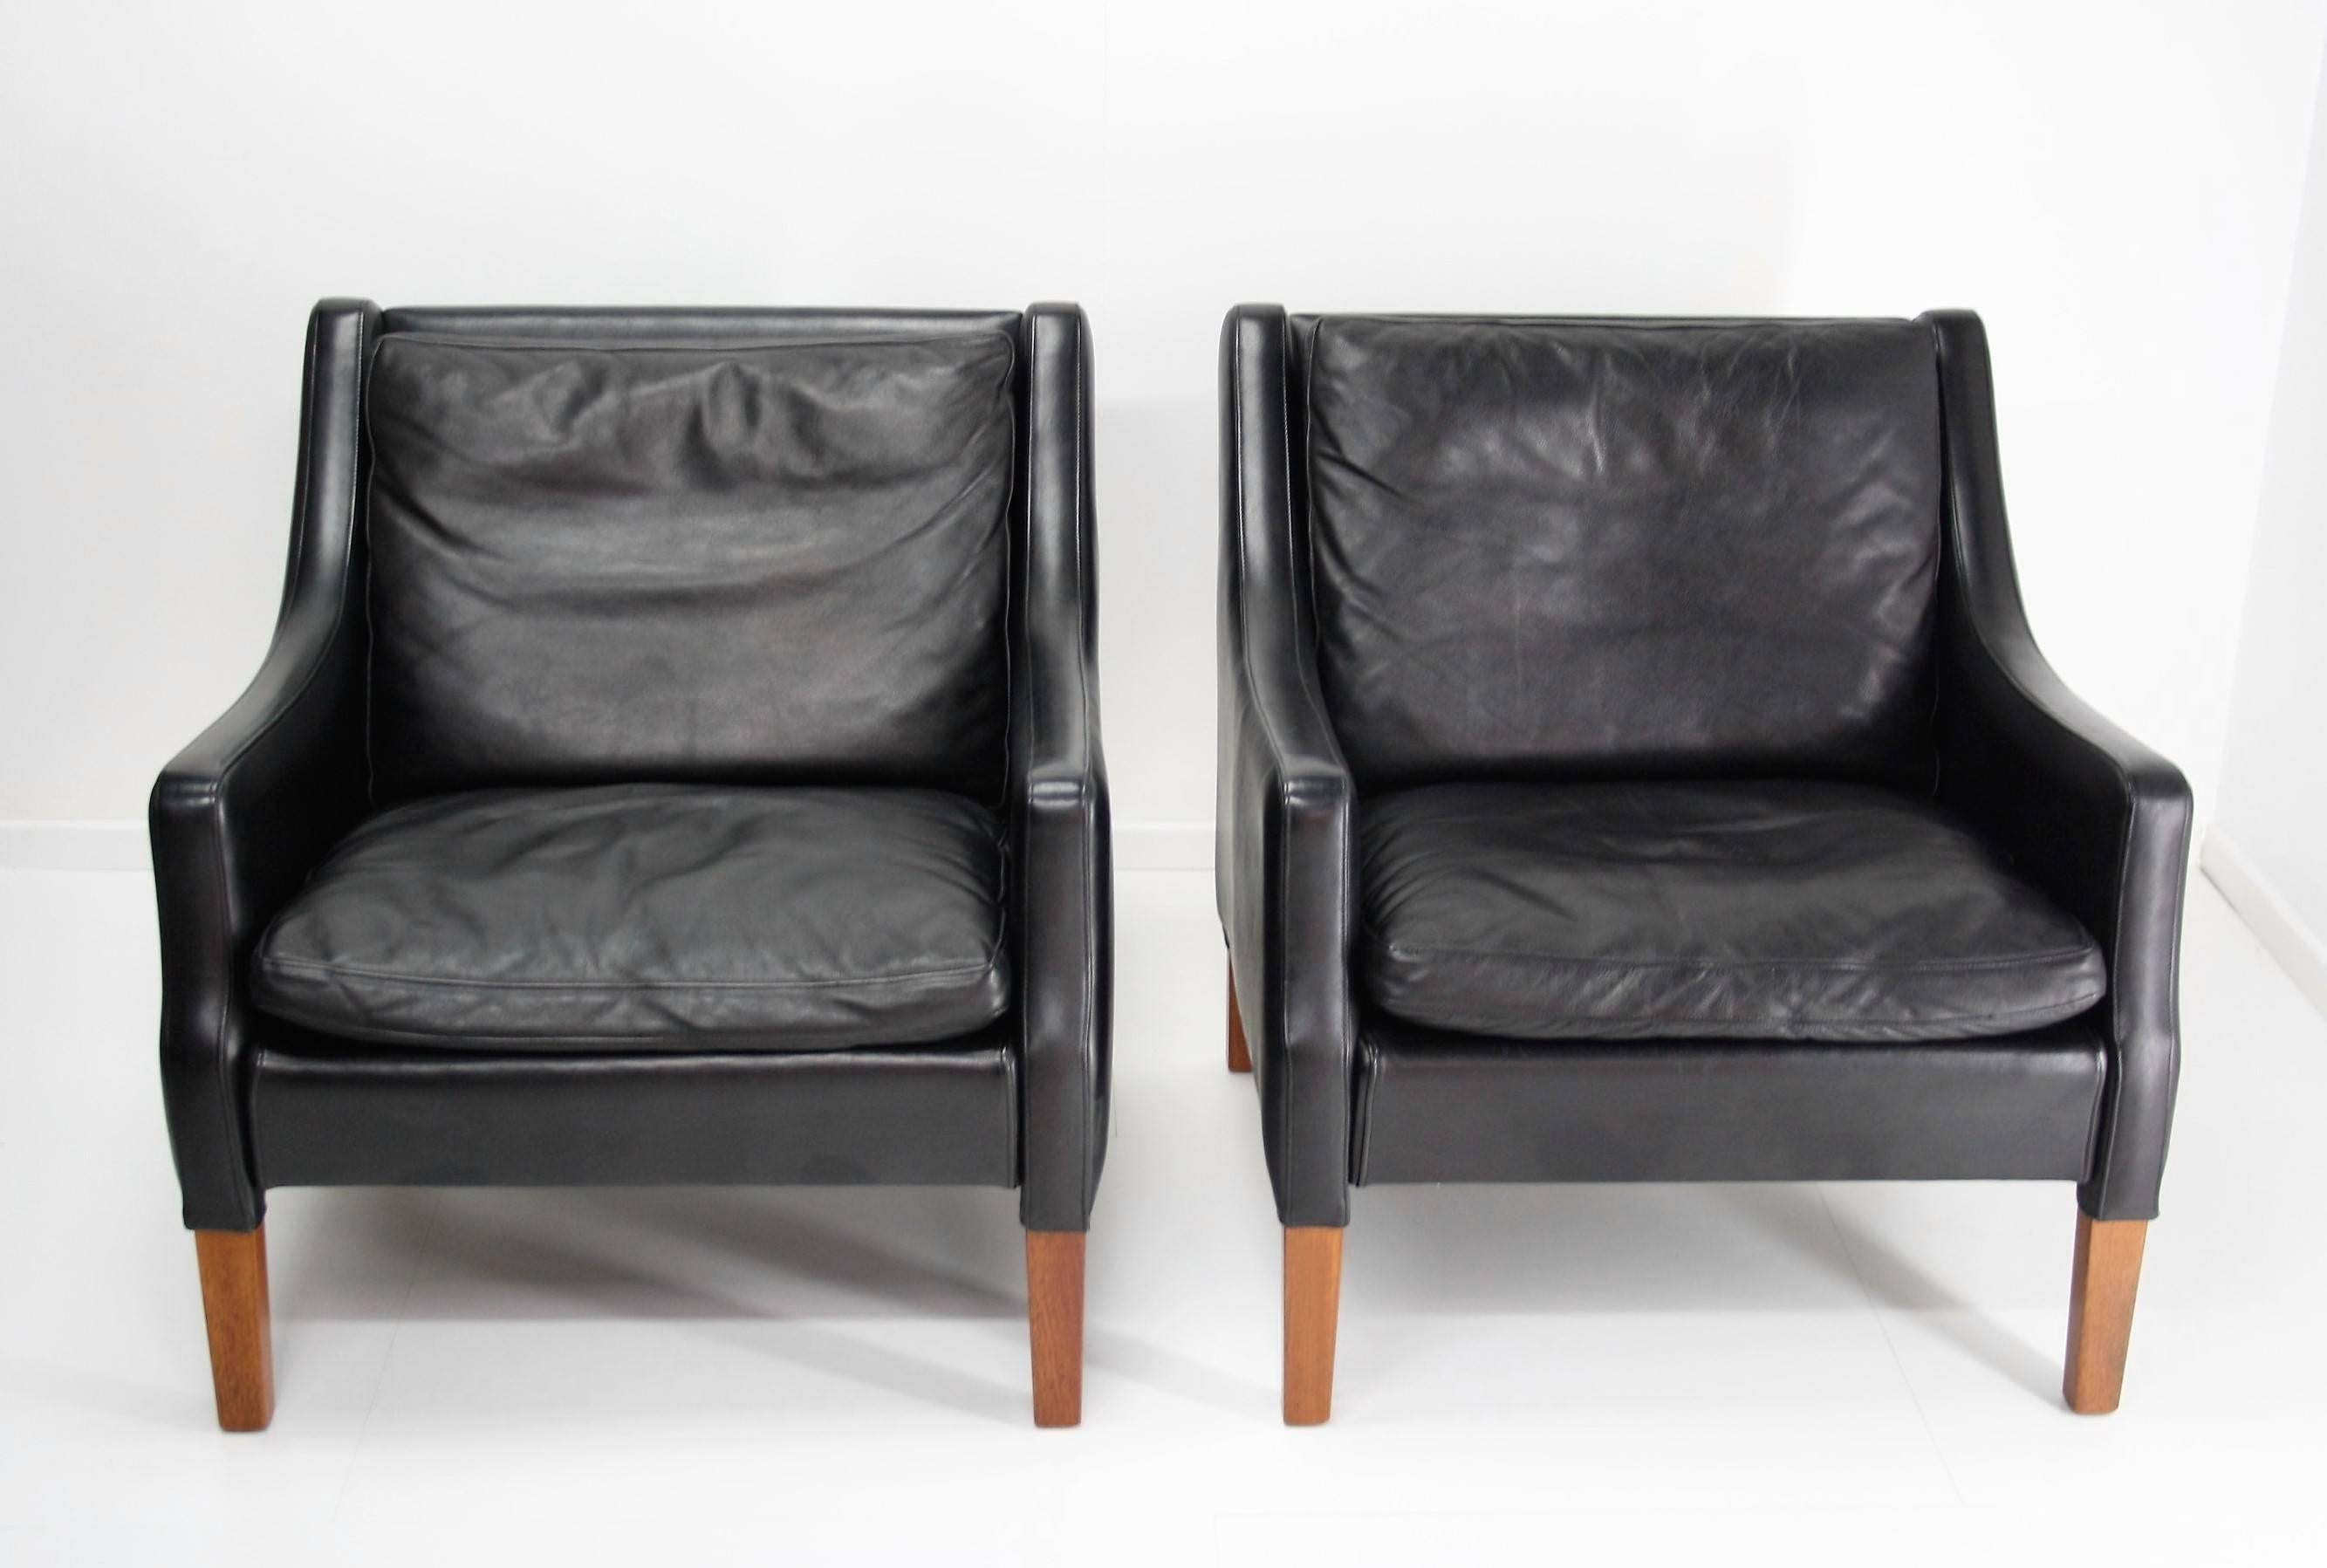 Pair of easy chairs with a solid teak frame and tufted beautiful patinated black leather cushions. 
The patinated leather is very desirable in combination with the teakwood.